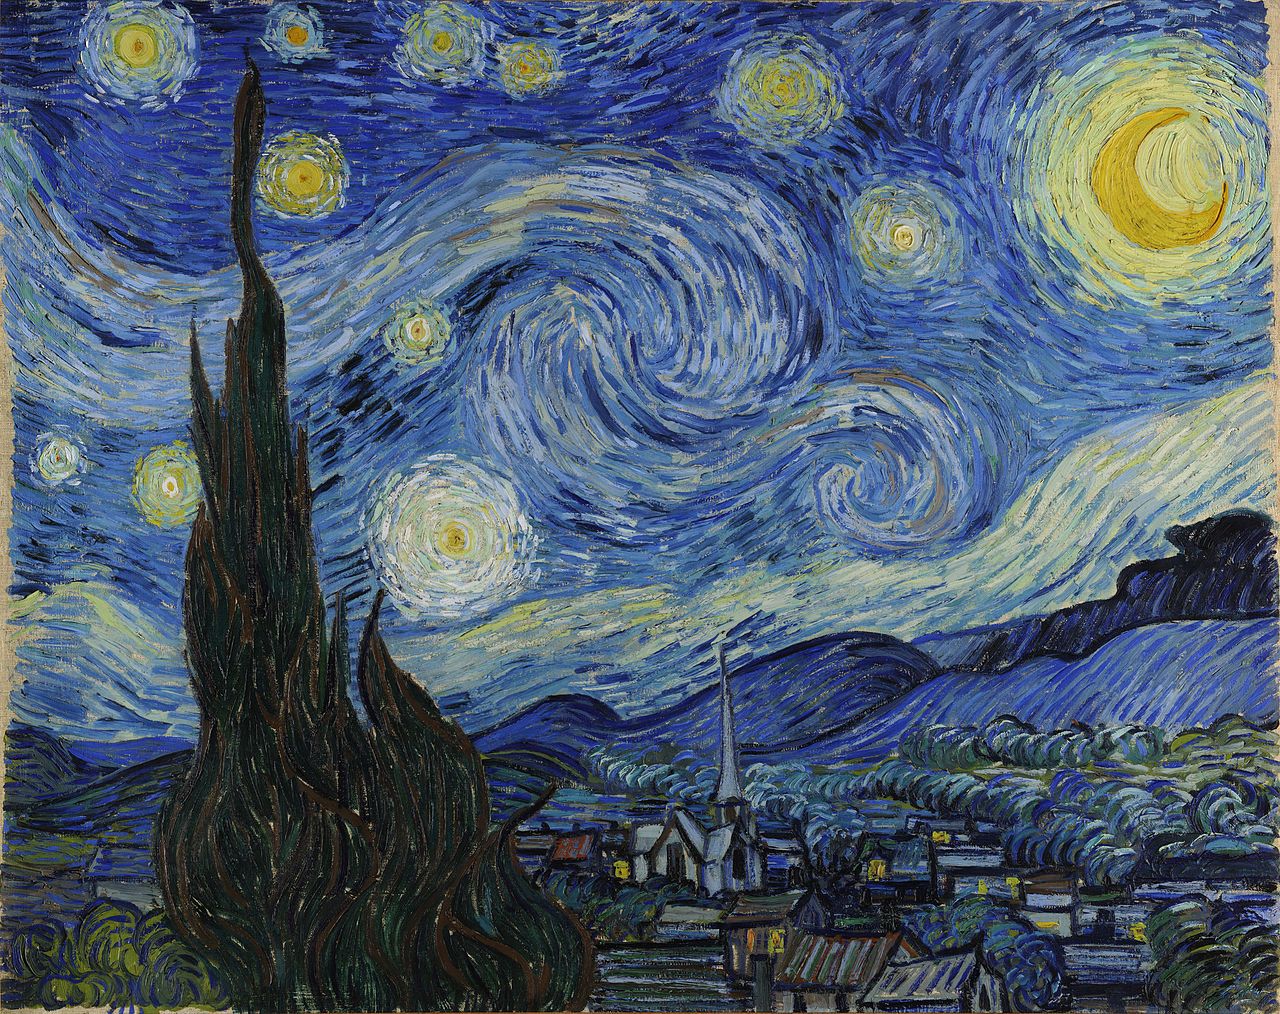 painting by Vincent Van Gogh called The Starry Night, 1889